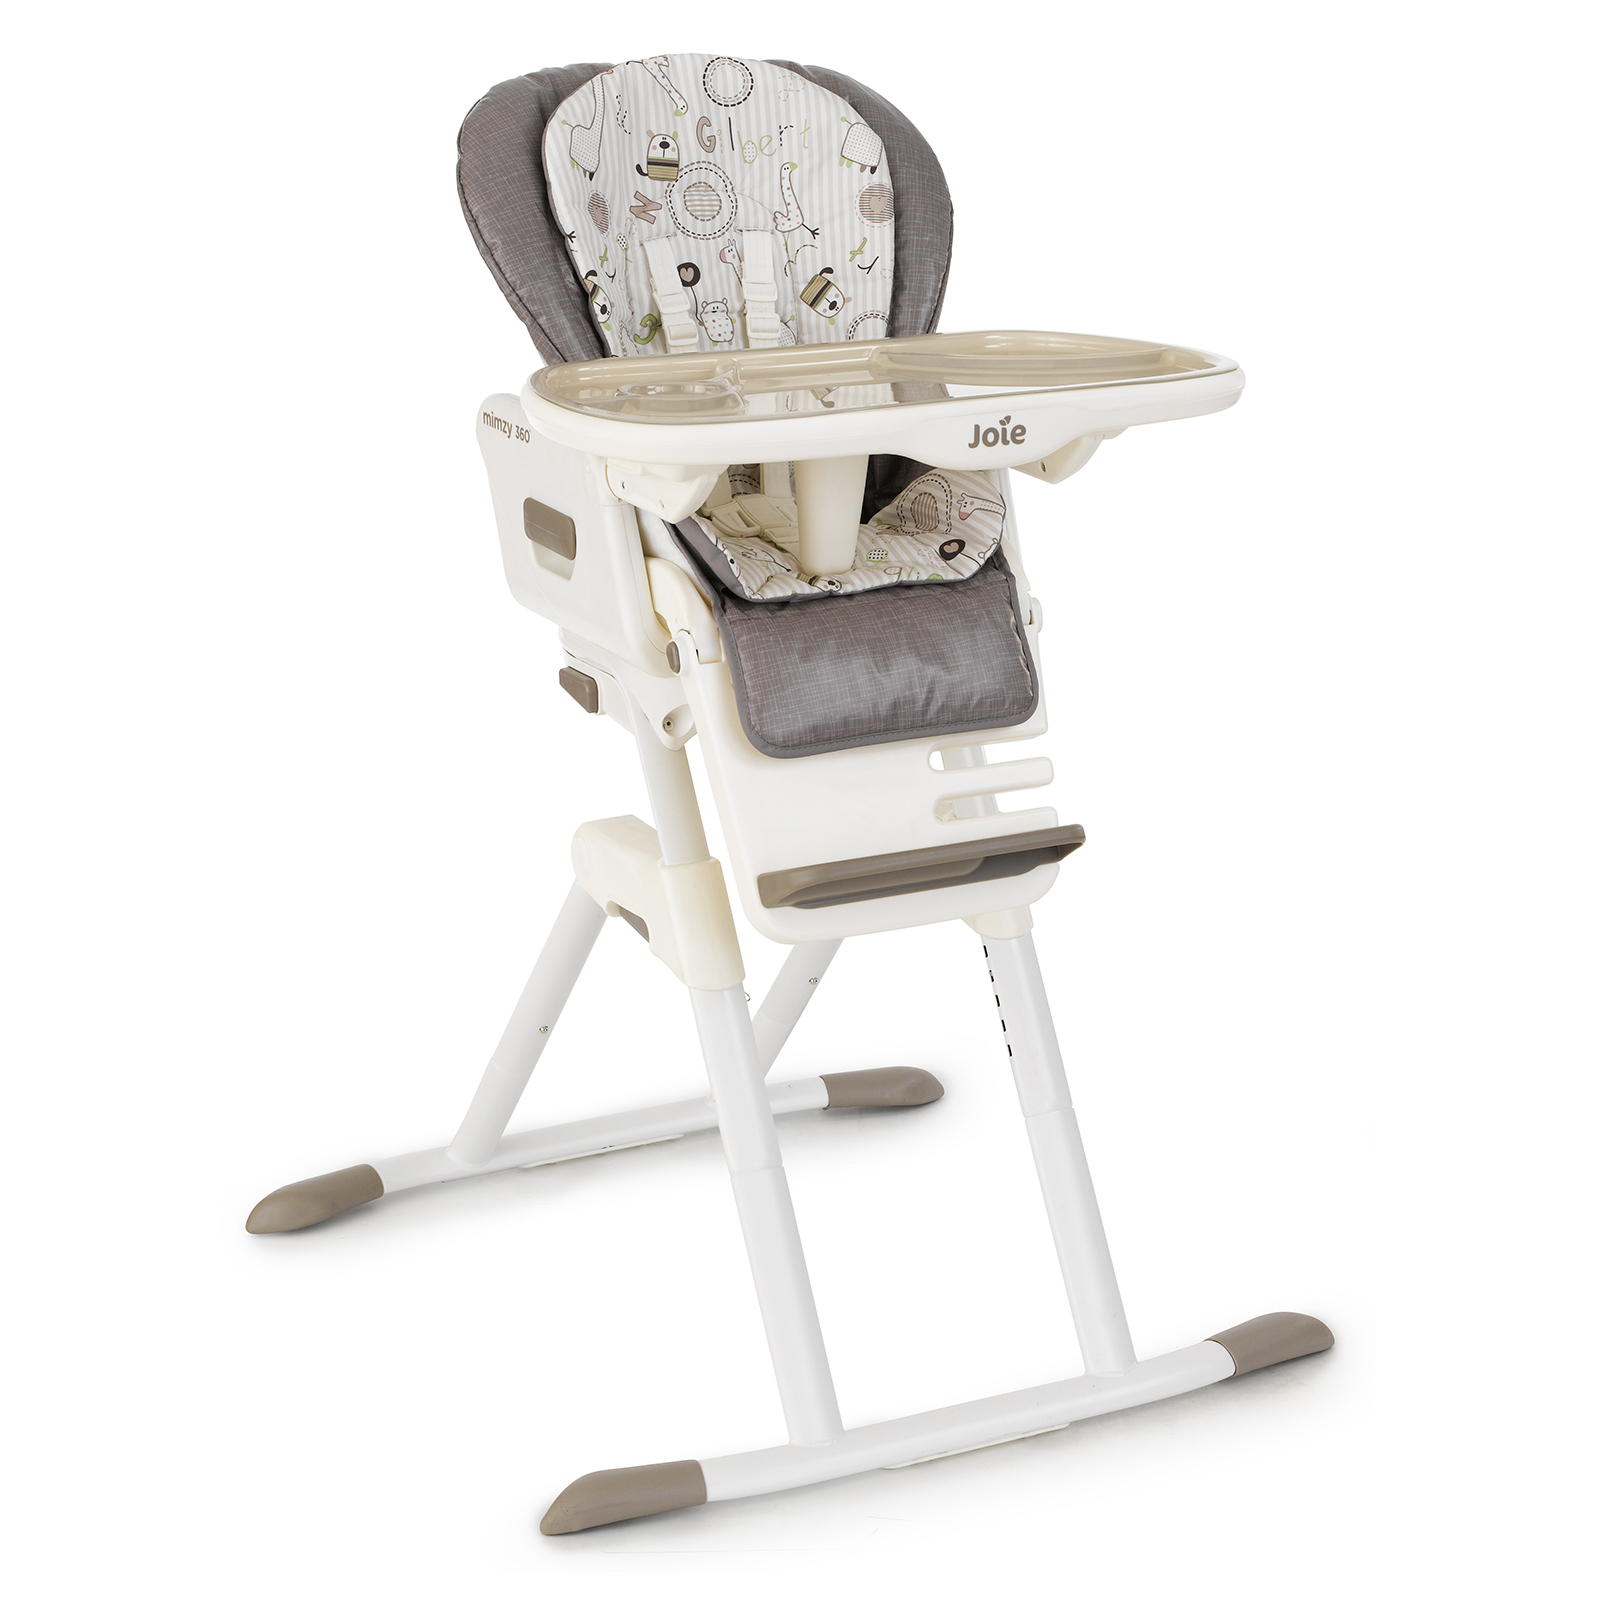  High Chair Joie 360 for Simple Design